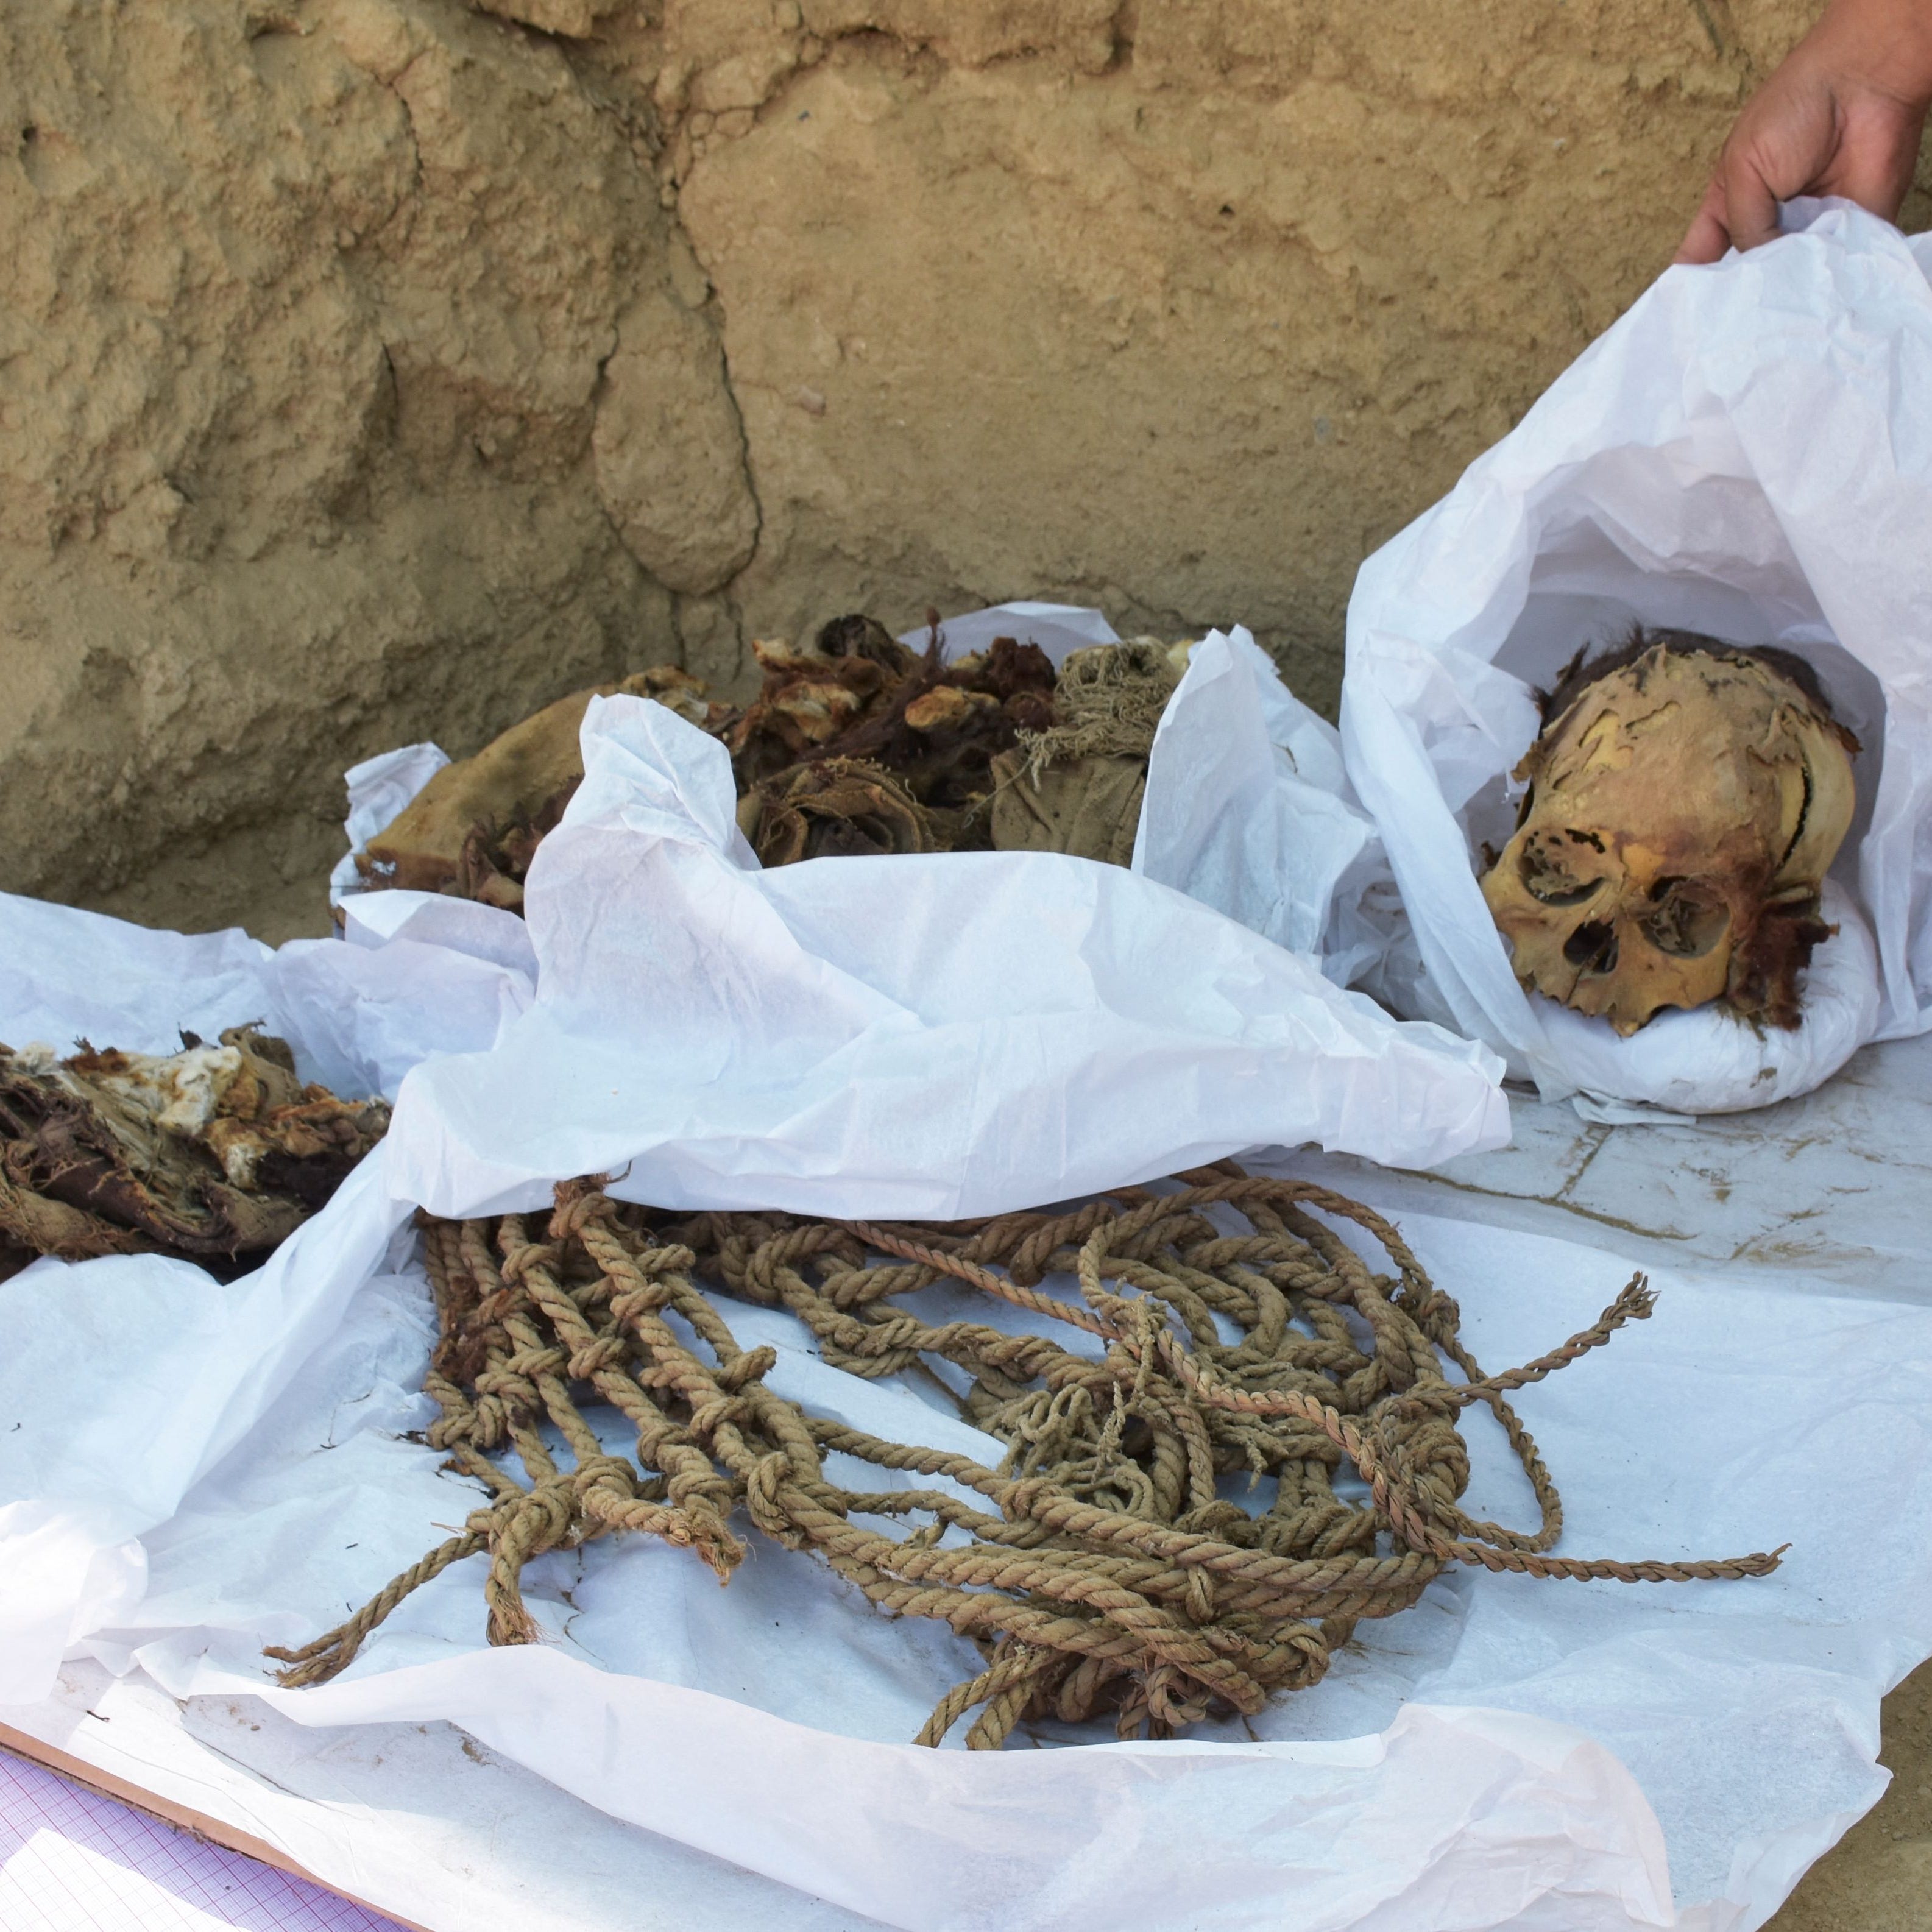 This undated handout picture relased by the Archeology Department of the San Marcos University shows the remains of a pre-Inca individual unearthed at the Cajamarquilla Archaeological Complex in Cajamarquilla, Peru. - Peruvian archaeologists discovered a pre-Inca mummy between 800 and 1,200 years old in perfect condition, while they were excavating at an ancient mud urban center on the outskirts of Lima, those responsible for the find reported Tuesday. The remains are in perfect condition and belong to a teenager, who would   have been about 12 or 13 years old with an approximate height of 1 meter 30 centimeters. (Photo by Handout / Archaeology Department of the San Marcos University / AFP) / RESTRICTED TO EDITORIAL USE - MANDATORY CREDIT "AFP PHOTO / ARCHAEOLOGY DEPARTMENT OF THE SAN MARCOS UNIVERSITY" - NO MARKETING NO ADVERTISING CAMPAIGNS - DISTRIBUTED AS A SERVICE TO CLIENTS (Photo by HANDOUT/Archaeology Department of the Sa/AFP via Getty Images) ORIG FILE ID: AFP_33DU8WC.jpg